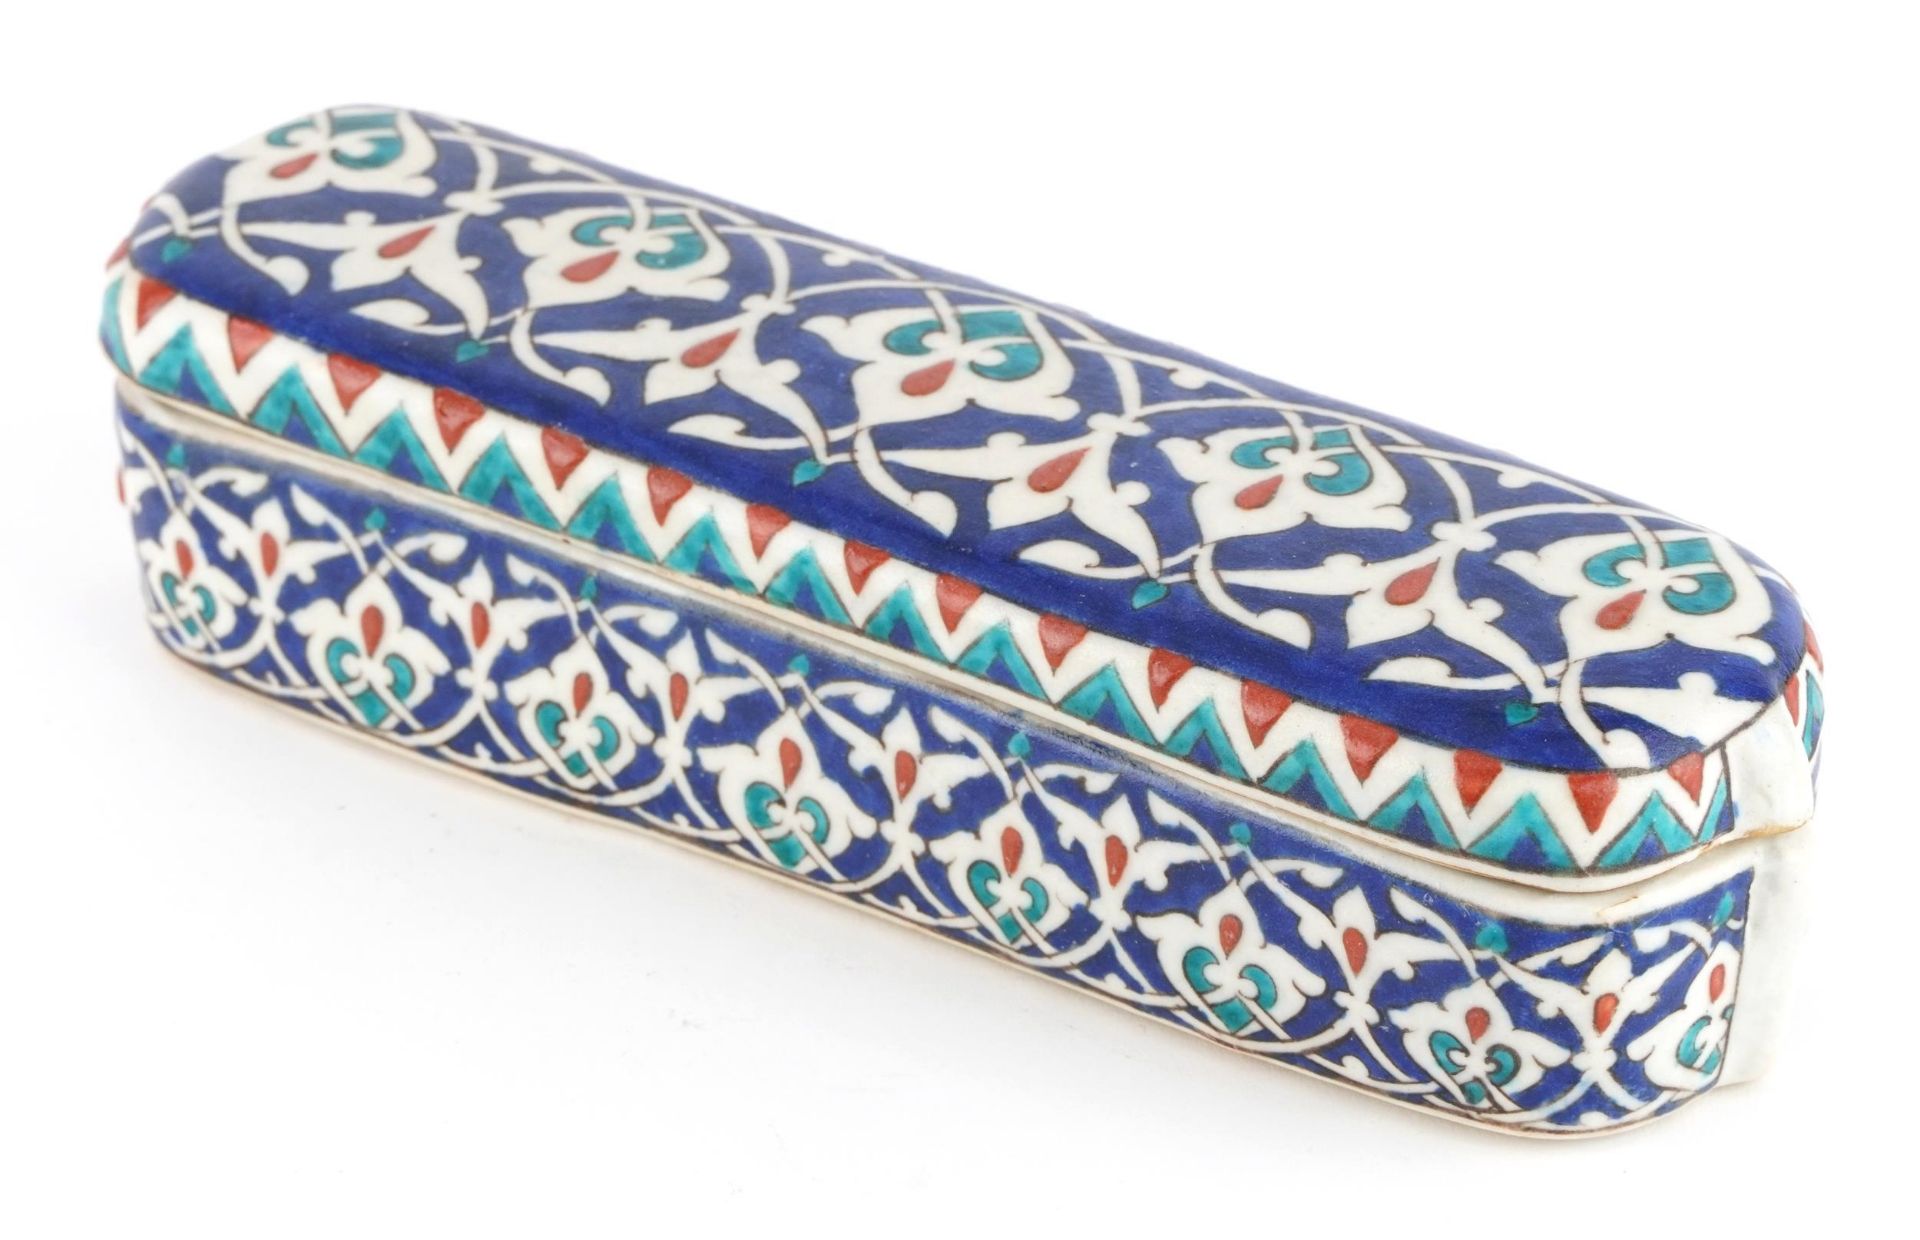 Turkish Iznik pottery pen box and cover, 23.5cm in length - Image 5 of 10